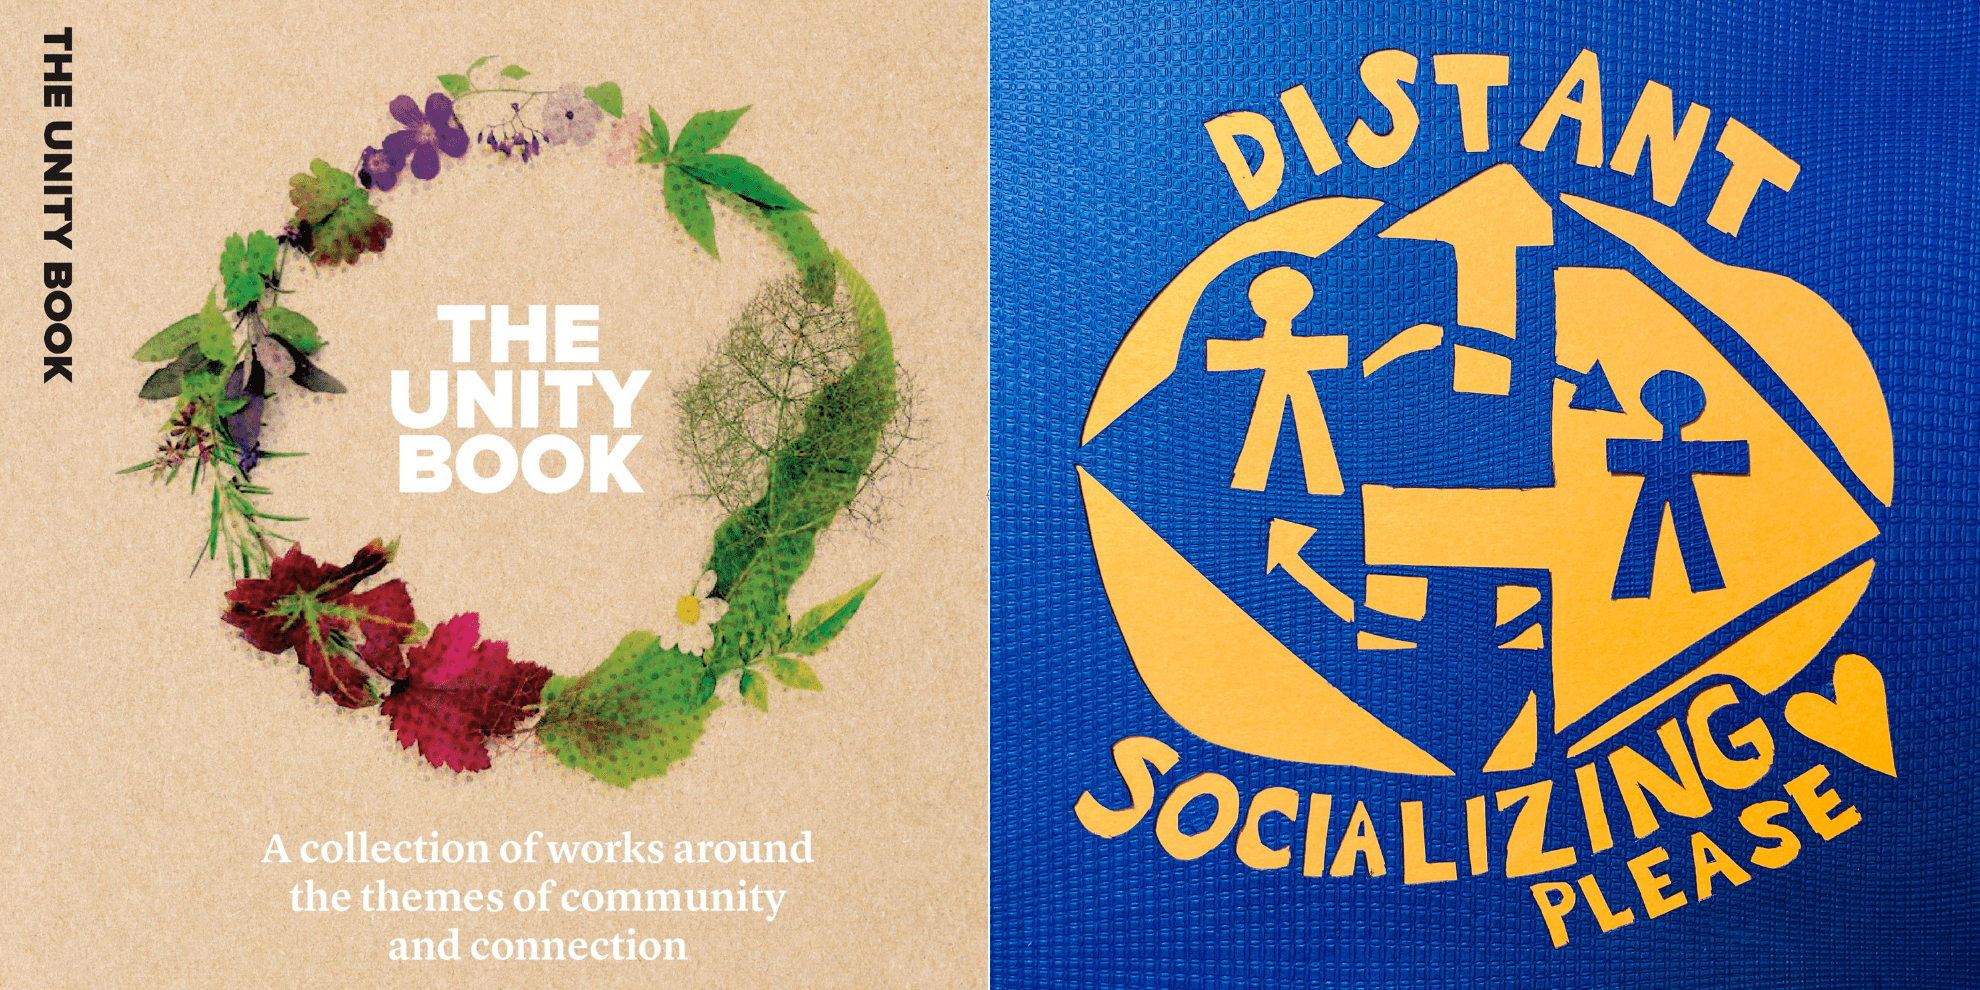 The Unity Book front page and artwork that depicts 'distant socializing'